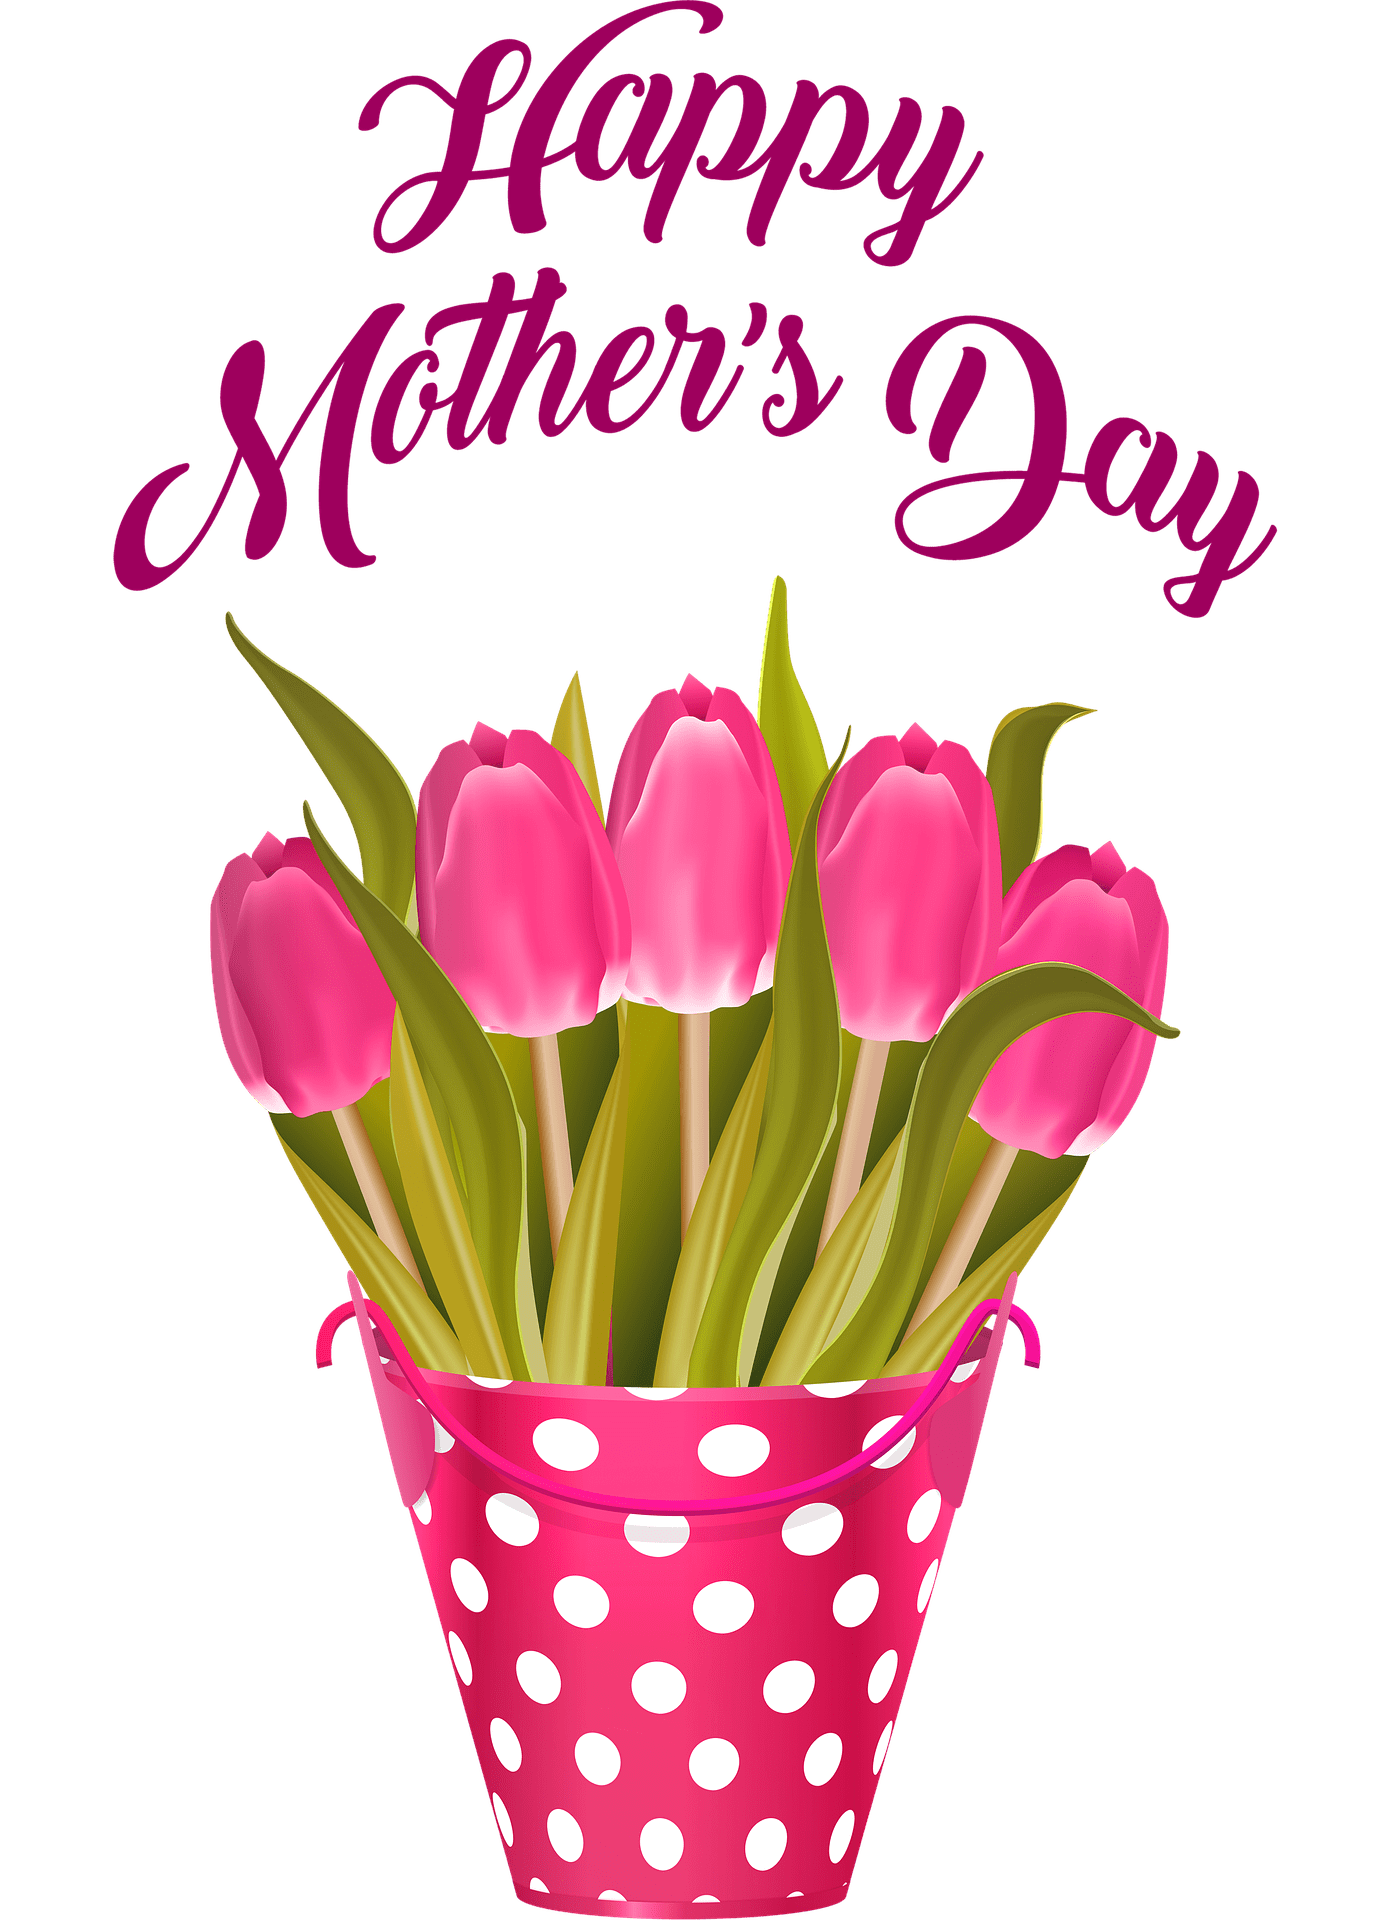 happy-mothers-day-4035401_1920